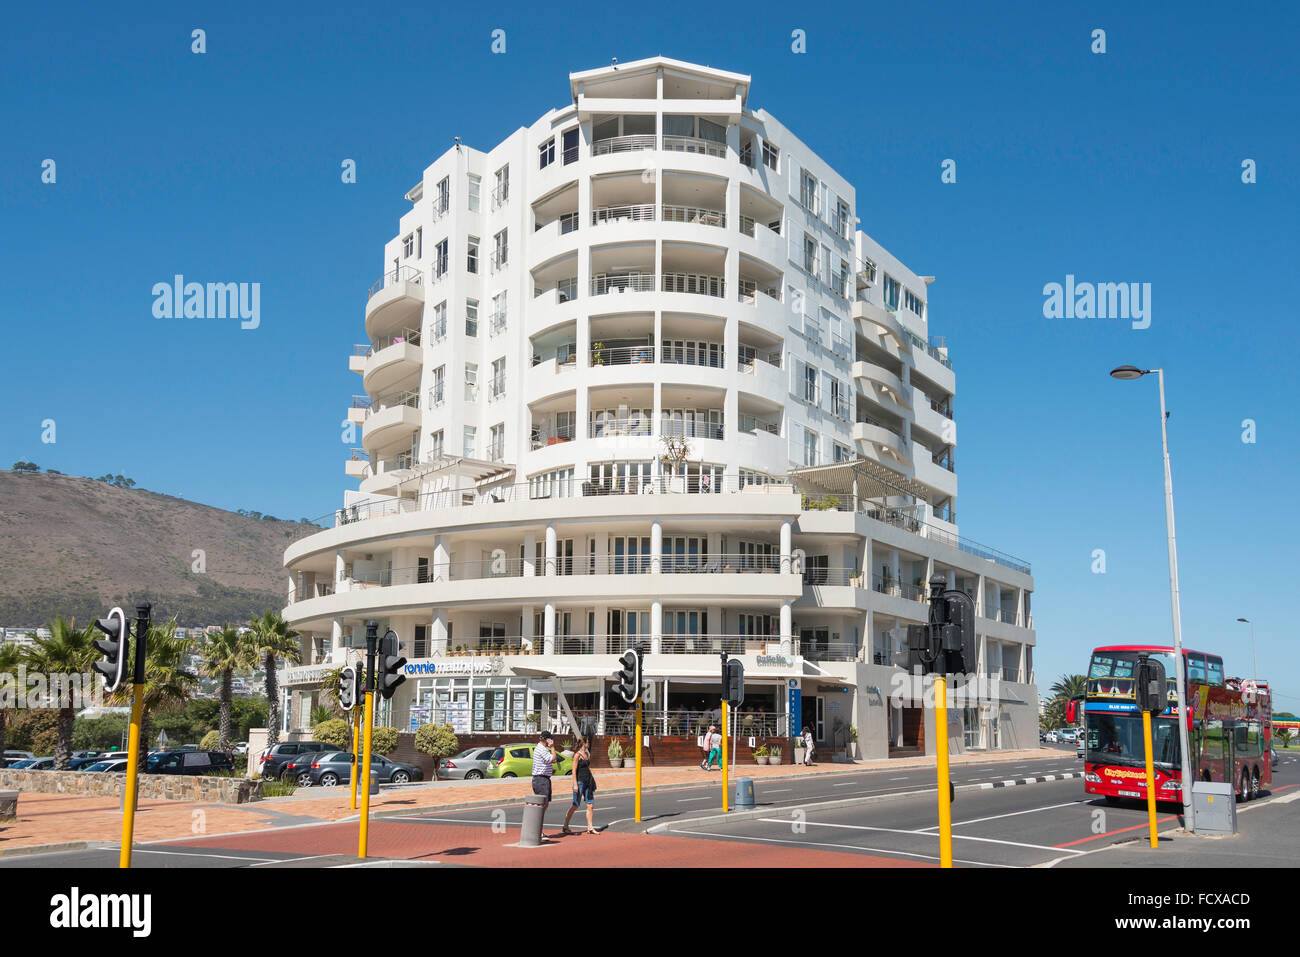 South Seas Studio Penthouse Building, Beach Road, Mouille Point, Cape Town, Western Cape Province, Republic of South Africa Stock Photo